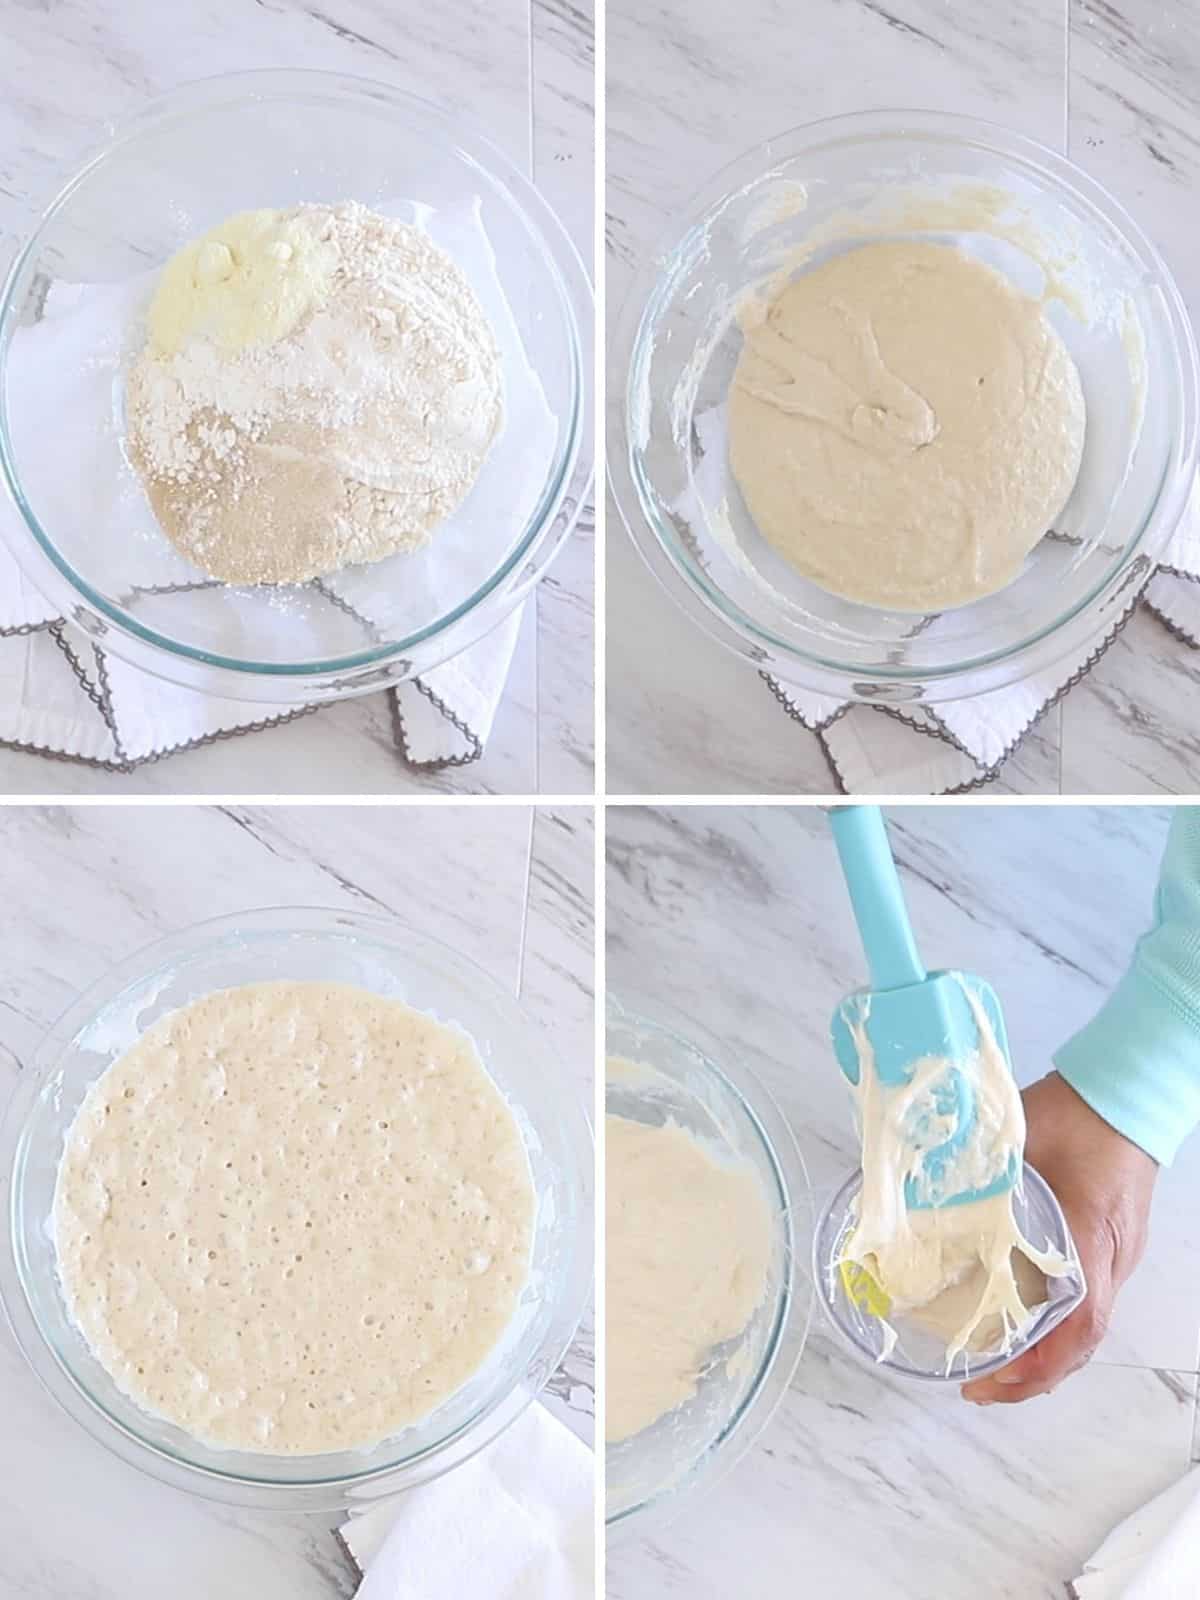 A collage of 4 images showing how to make zalabia dough.